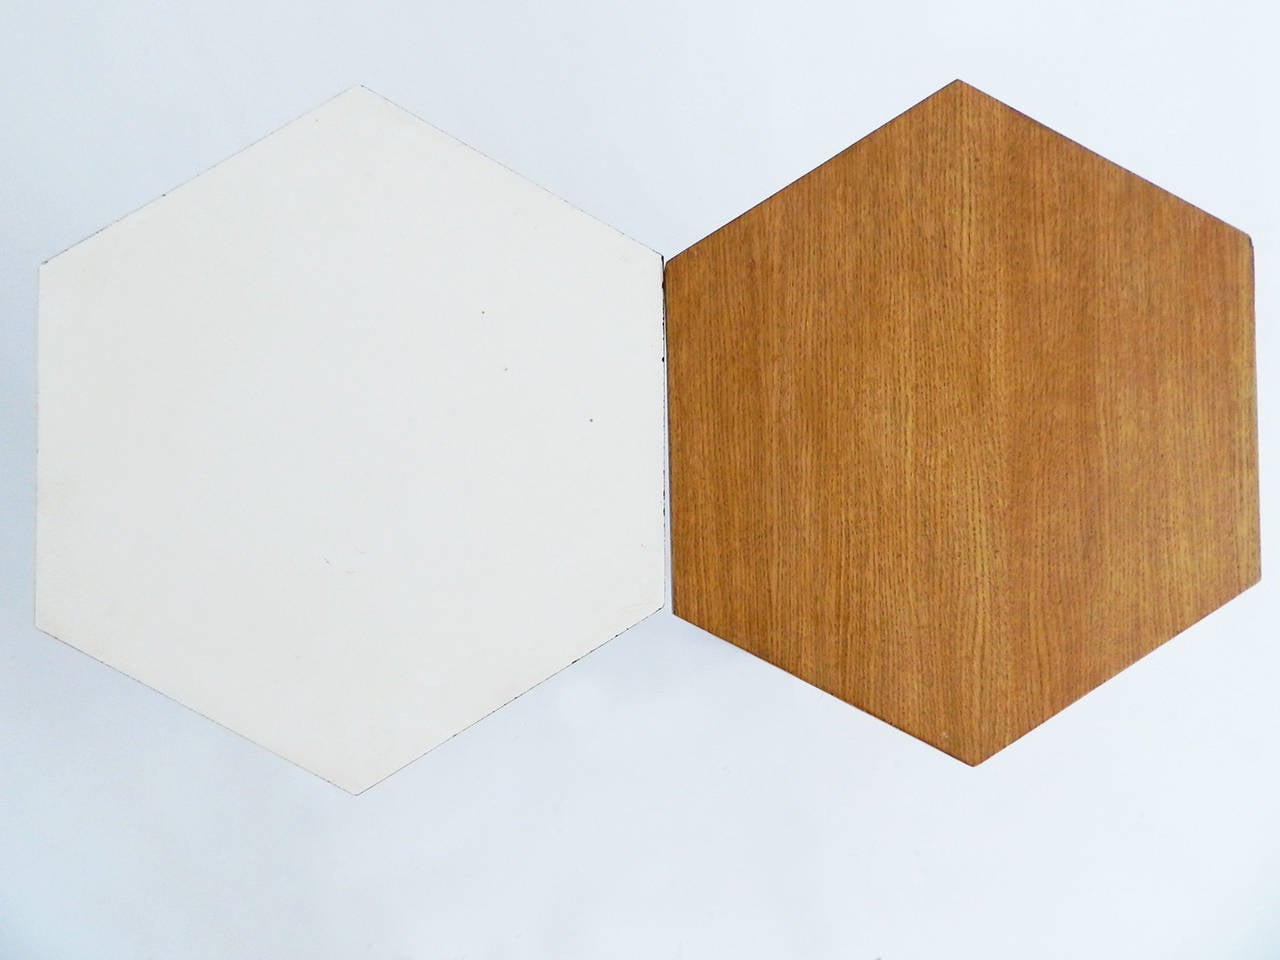 Mid-20th Century Set of 4 Gio Ponti Laminated and Wood Modular Coffee Tables for ISA